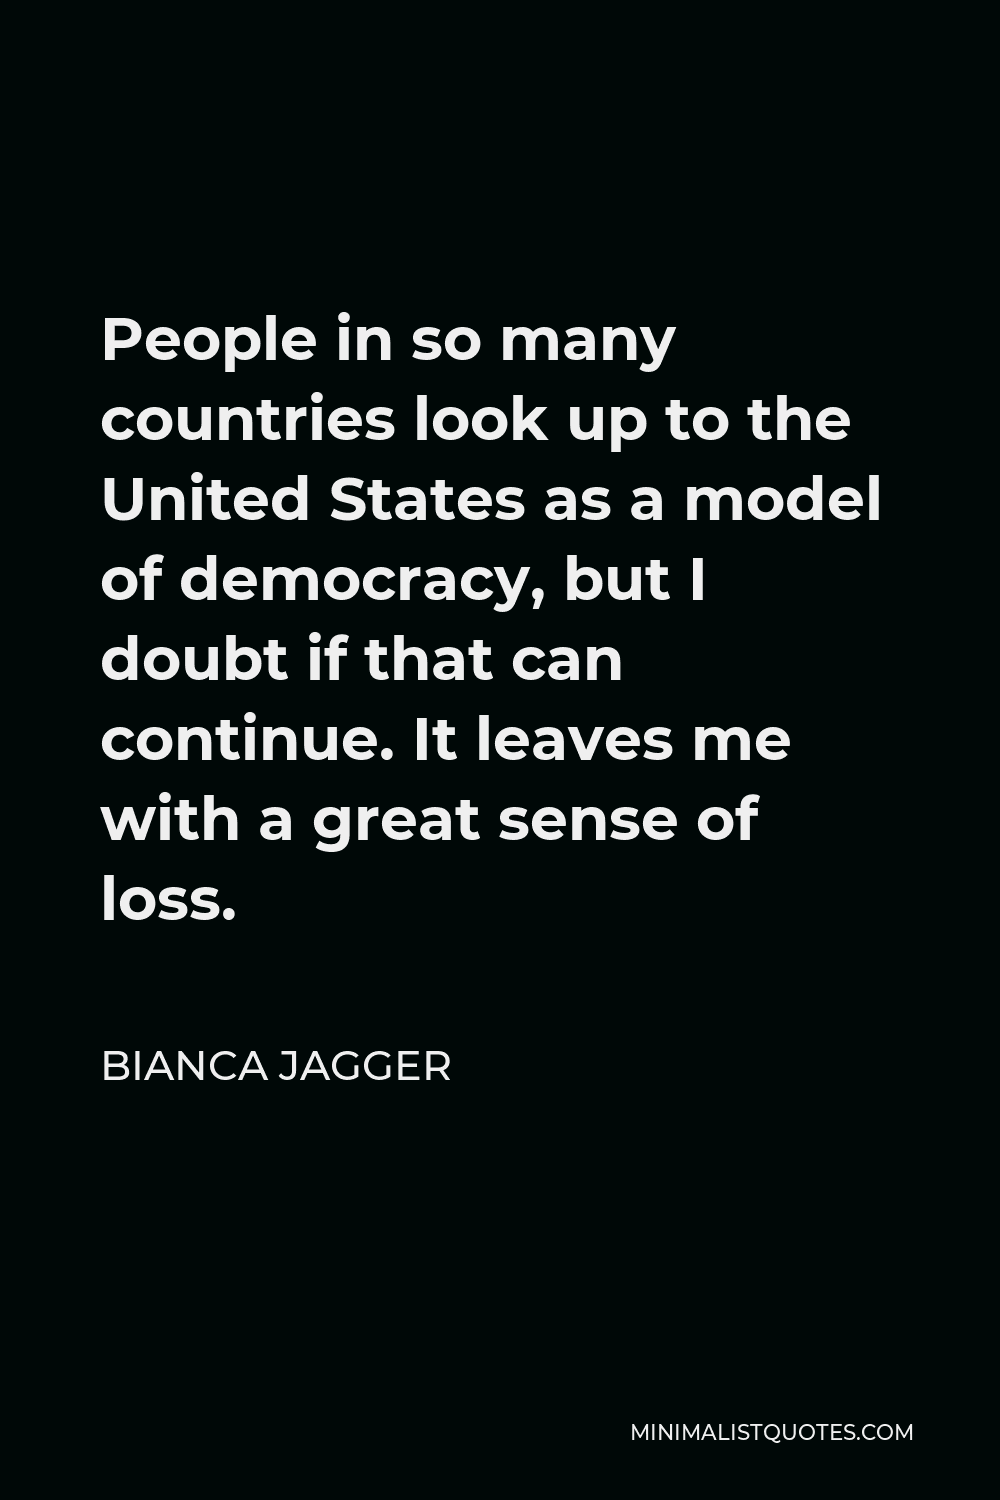 Bianca Jagger Quote - People in so many countries look up to the United States as a model of democracy, but I doubt if that can continue. It leaves me with a great sense of loss.